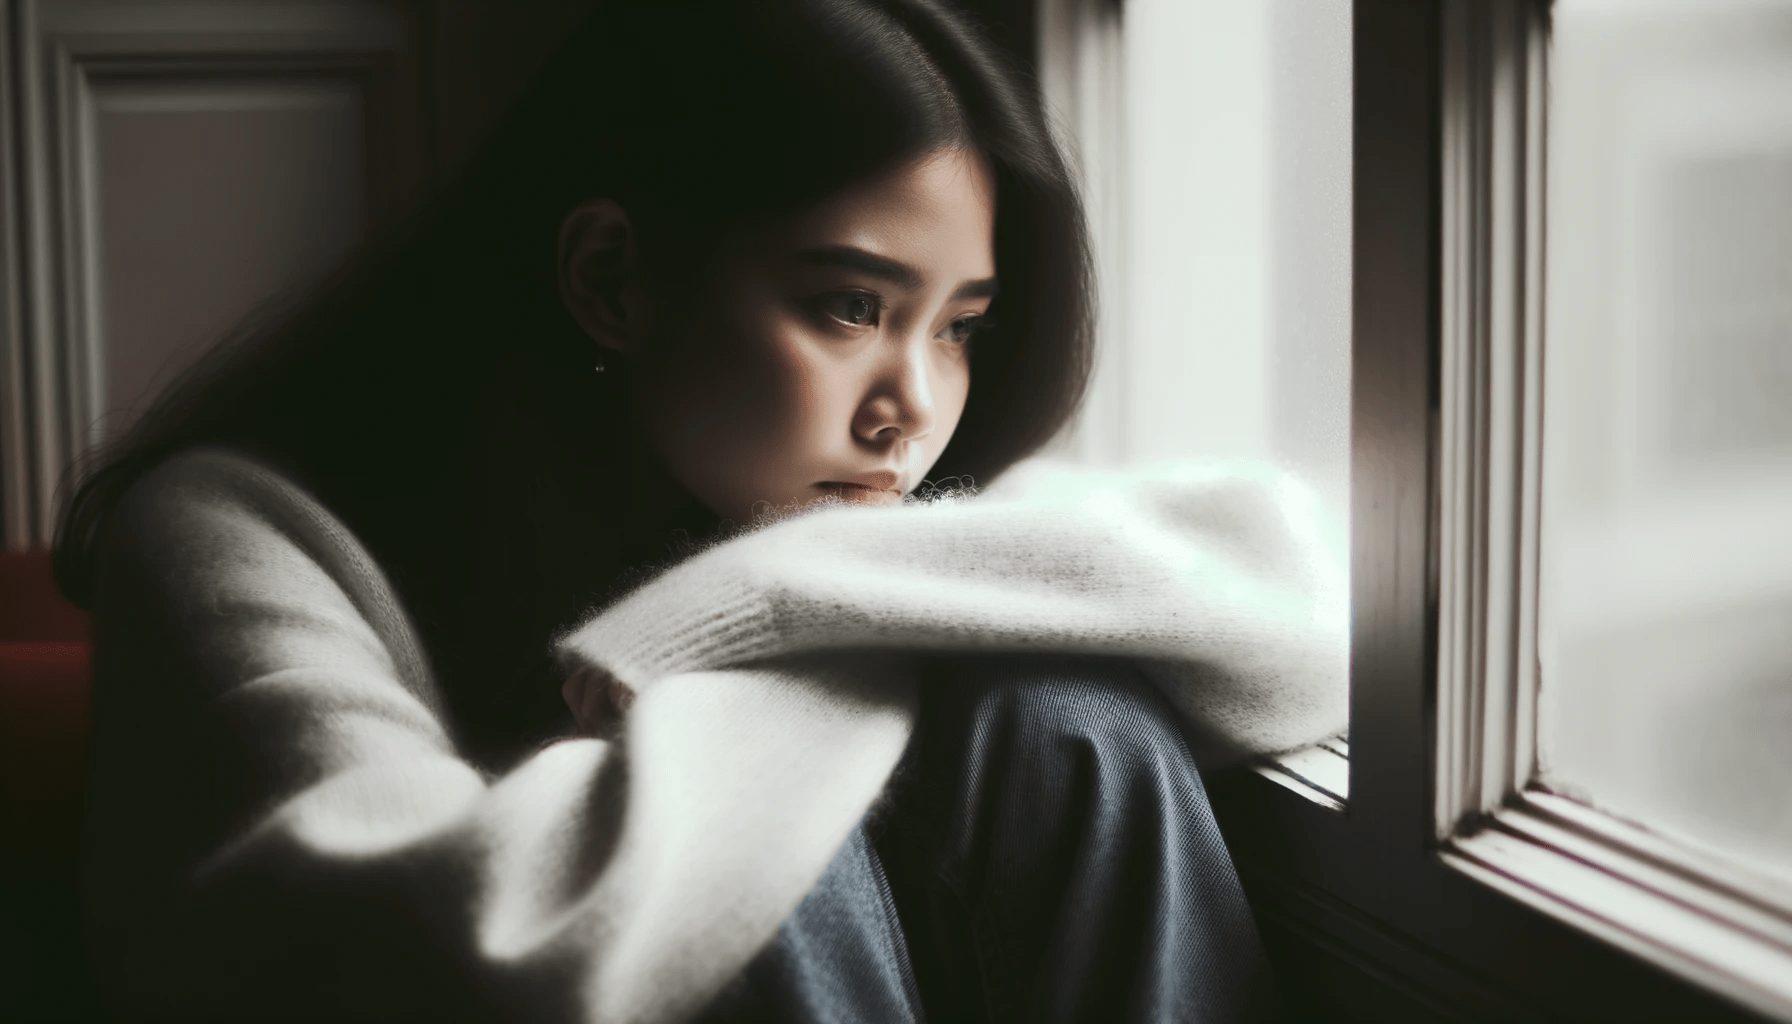 Photo of a melancholic woman sitting alone by a window her gaze directed outside with soft light casting a gentle glow on her face emphasizing her